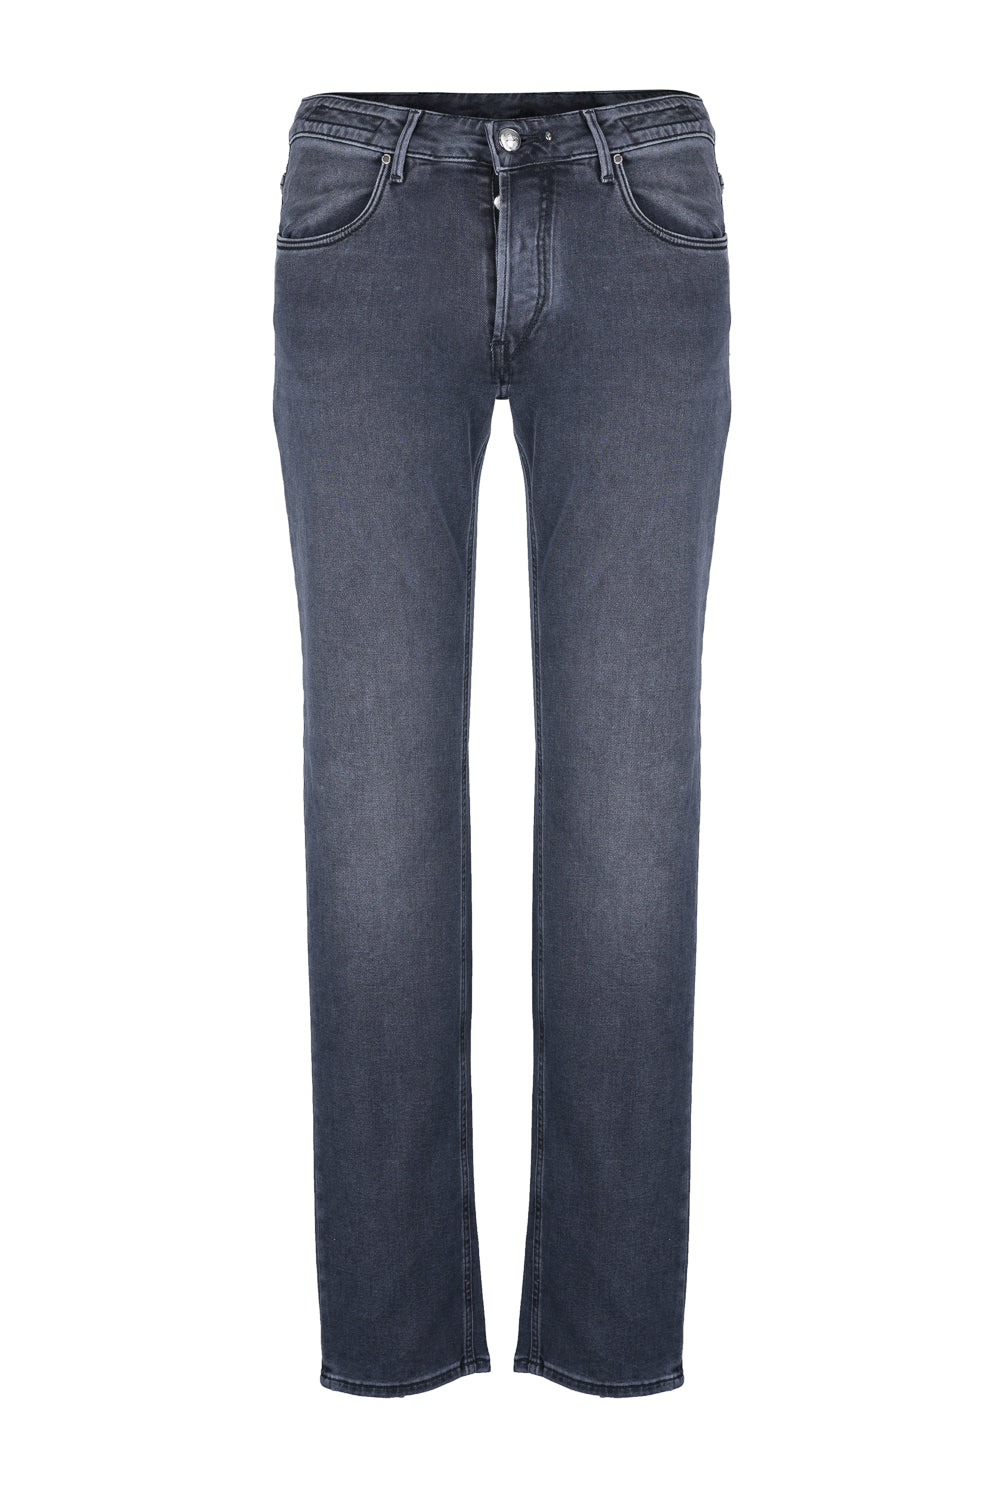 Hand Picked Ravello Charcoal Jean